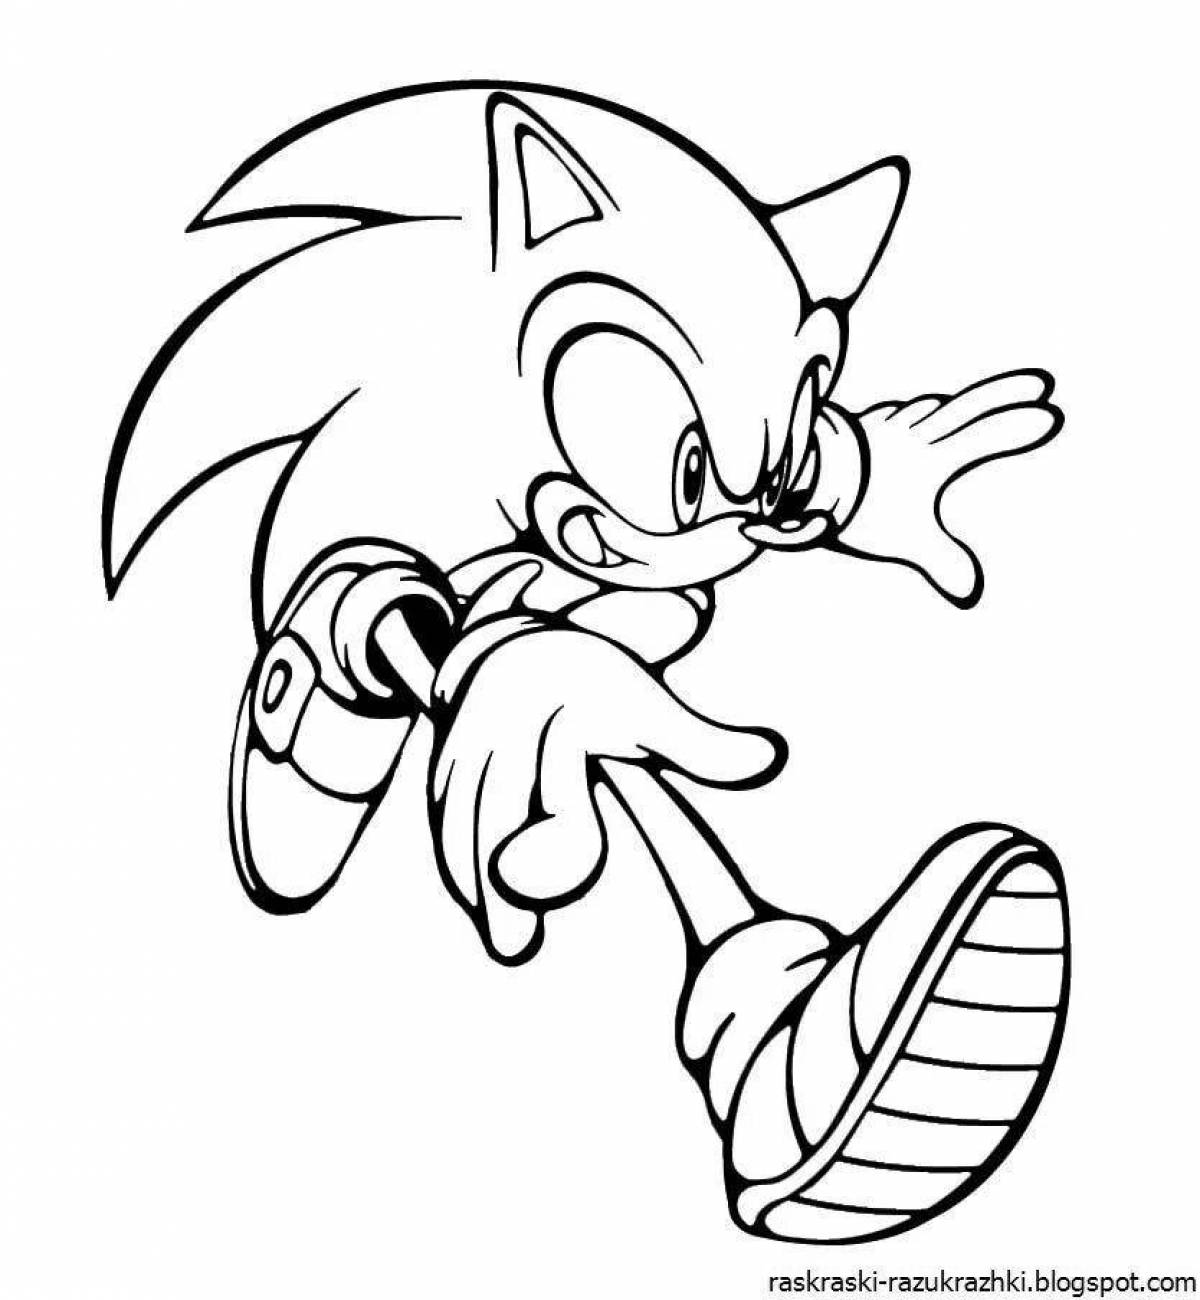 Joyous new year sonic coloring page